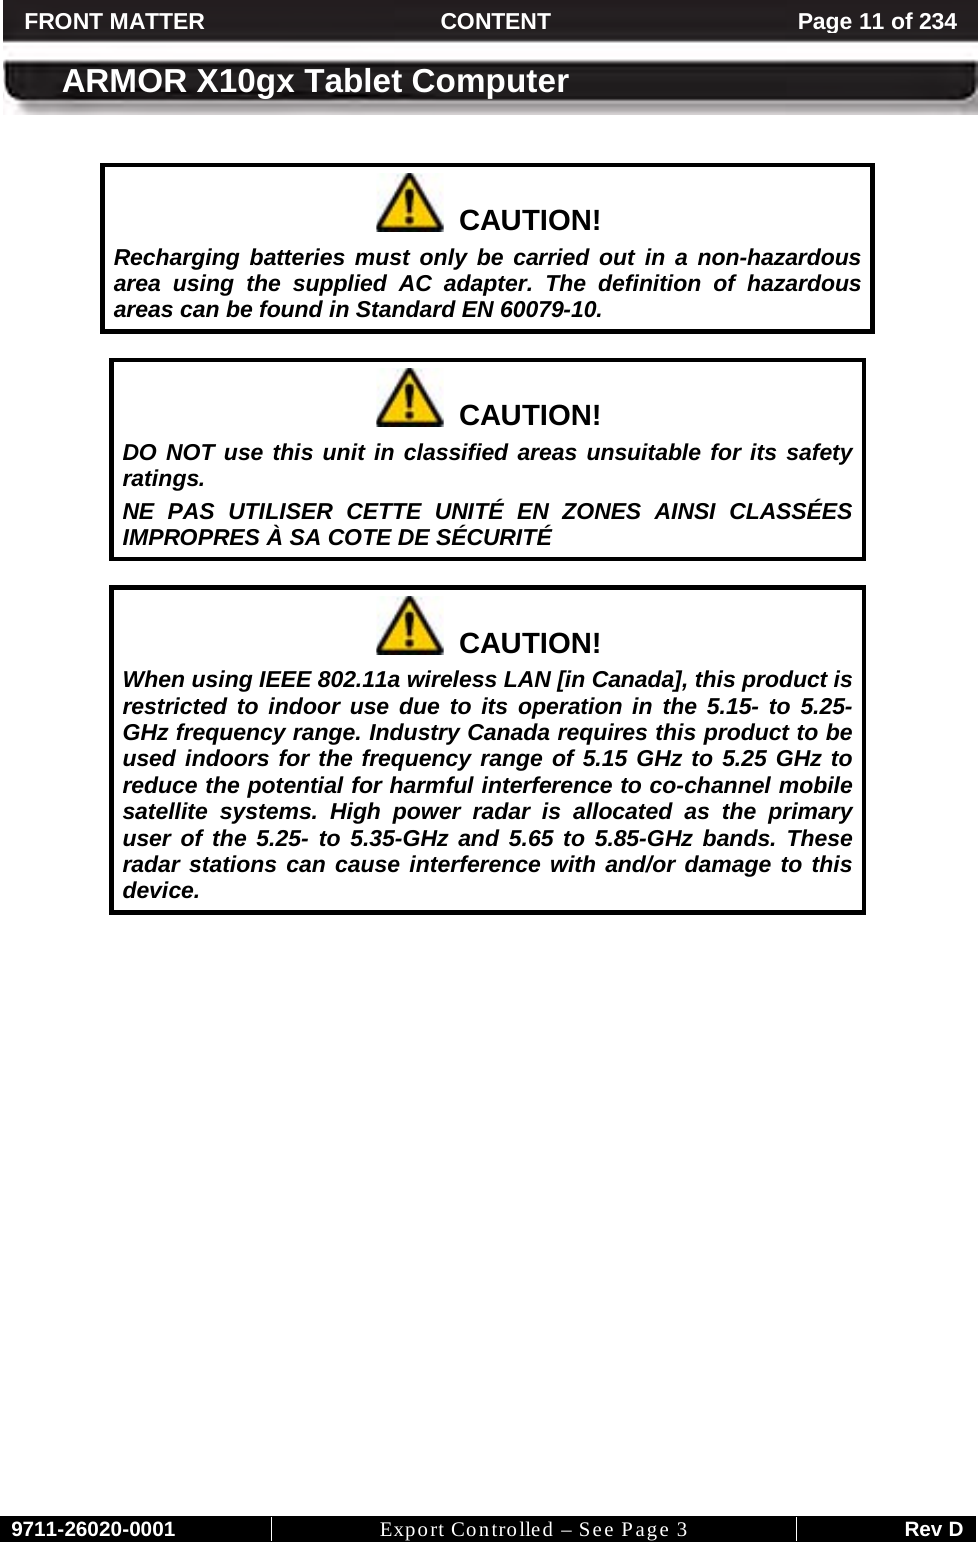     9711-26020-0001 Export Controlled – See Page 3 Rev D FRONT MATTER CONTENT Page 11 of 234  ARMOR X10gx Tablet Computer    CAUTION! Recharging batteries must only be carried out in a non-hazardous area using the supplied AC adapter. The definition of hazardous areas can be found in Standard EN 60079-10.    CAUTION! DO NOT use this unit in classified areas unsuitable for its safety ratings.  NE PAS UTILISER CETTE UNITÉ EN ZONES AINSI CLASSÉES IMPROPRES À SA COTE DE SÉCURITÉ    CAUTION! When using IEEE 802.11a wireless LAN [in Canada], this product is restricted to indoor use due to its operation in the 5.15- to 5.25-GHz frequency range. Industry Canada requires this product to be used indoors for the frequency range of 5.15 GHz to 5.25 GHz to reduce the potential for harmful interference to co-channel mobile satellite systems. High power radar is allocated as the primary user of the 5.25- to 5.35-GHz and 5.65 to 5.85-GHz bands. These radar stations can cause interference with and/or damage to this device.     